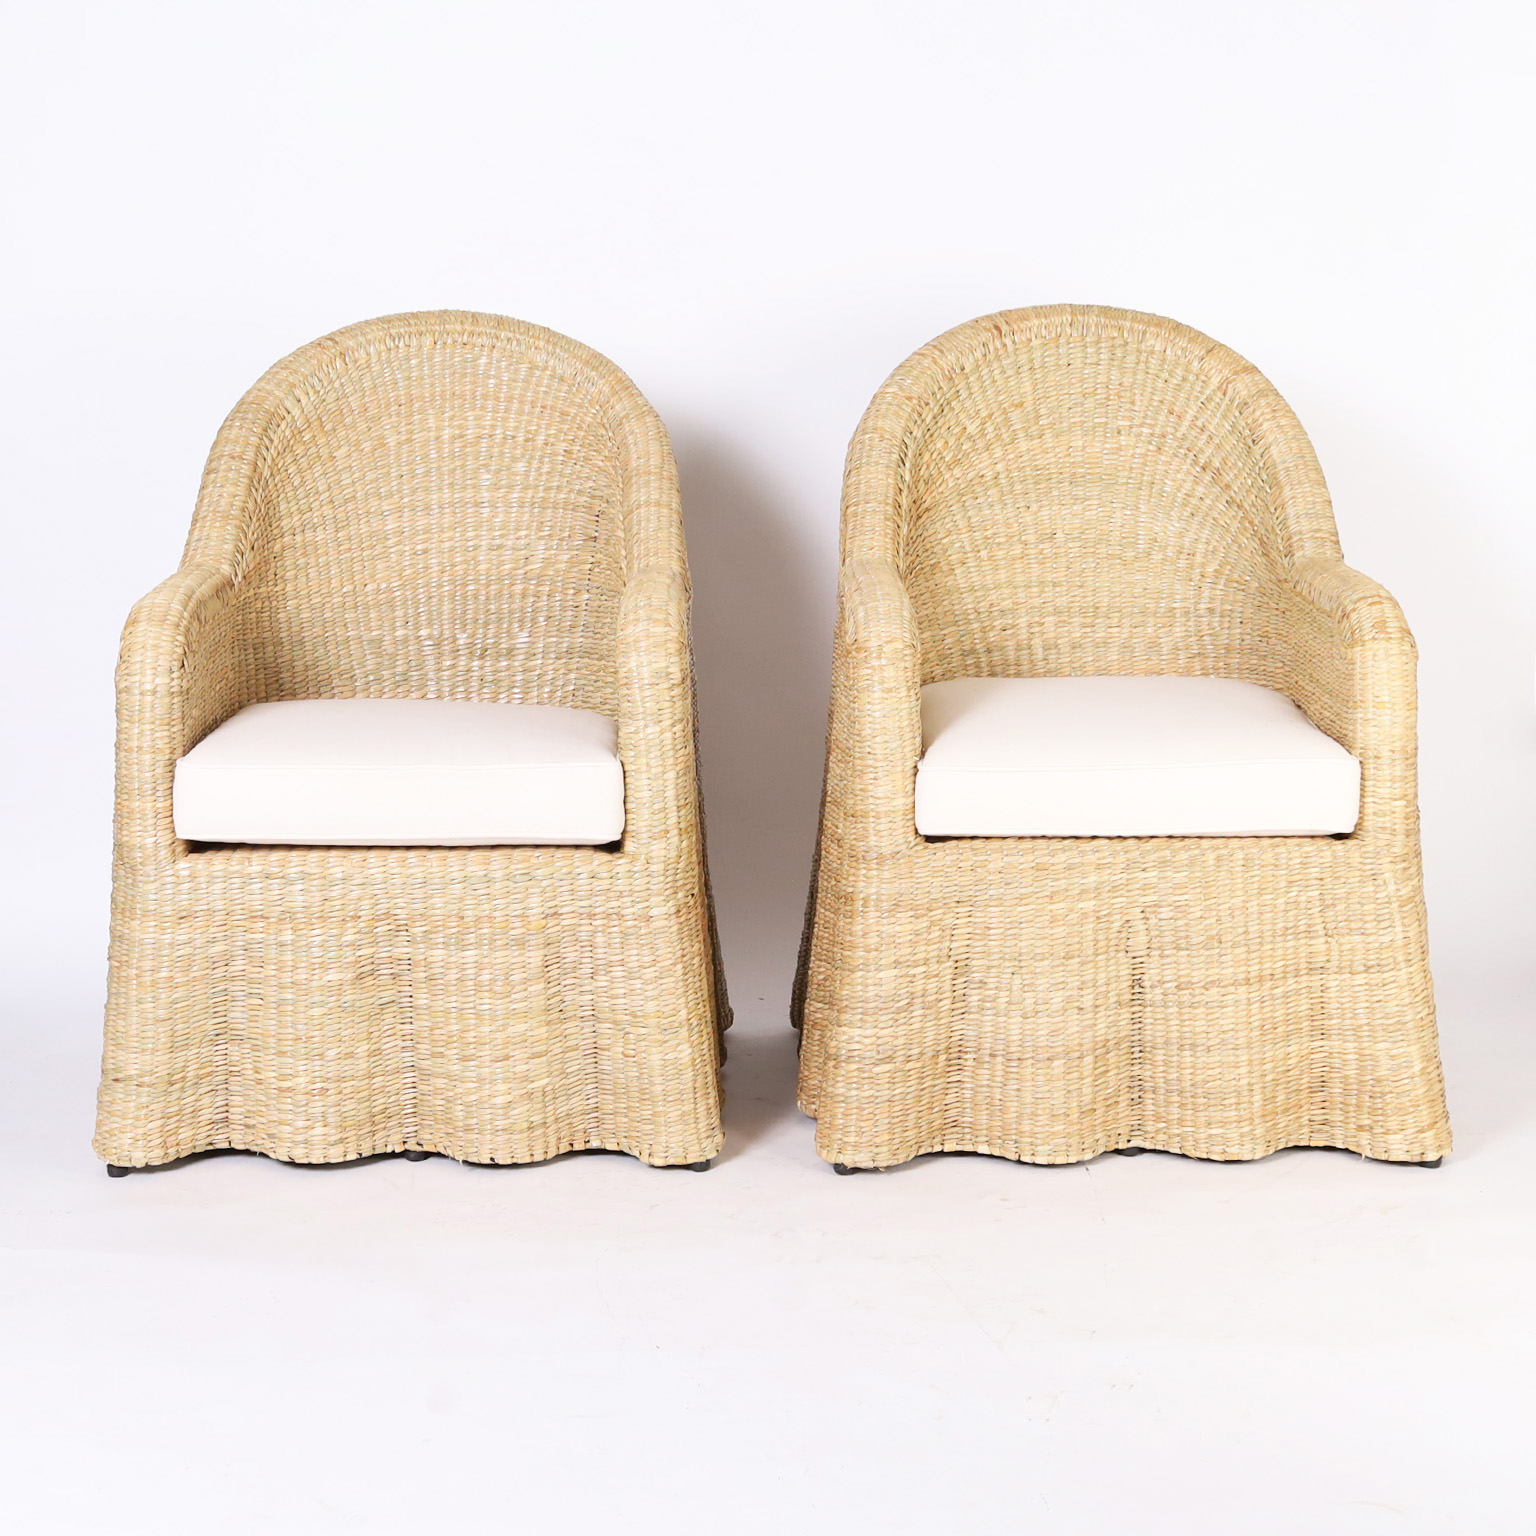 Ghost Drapery Armchairs from the FS Flores Collection